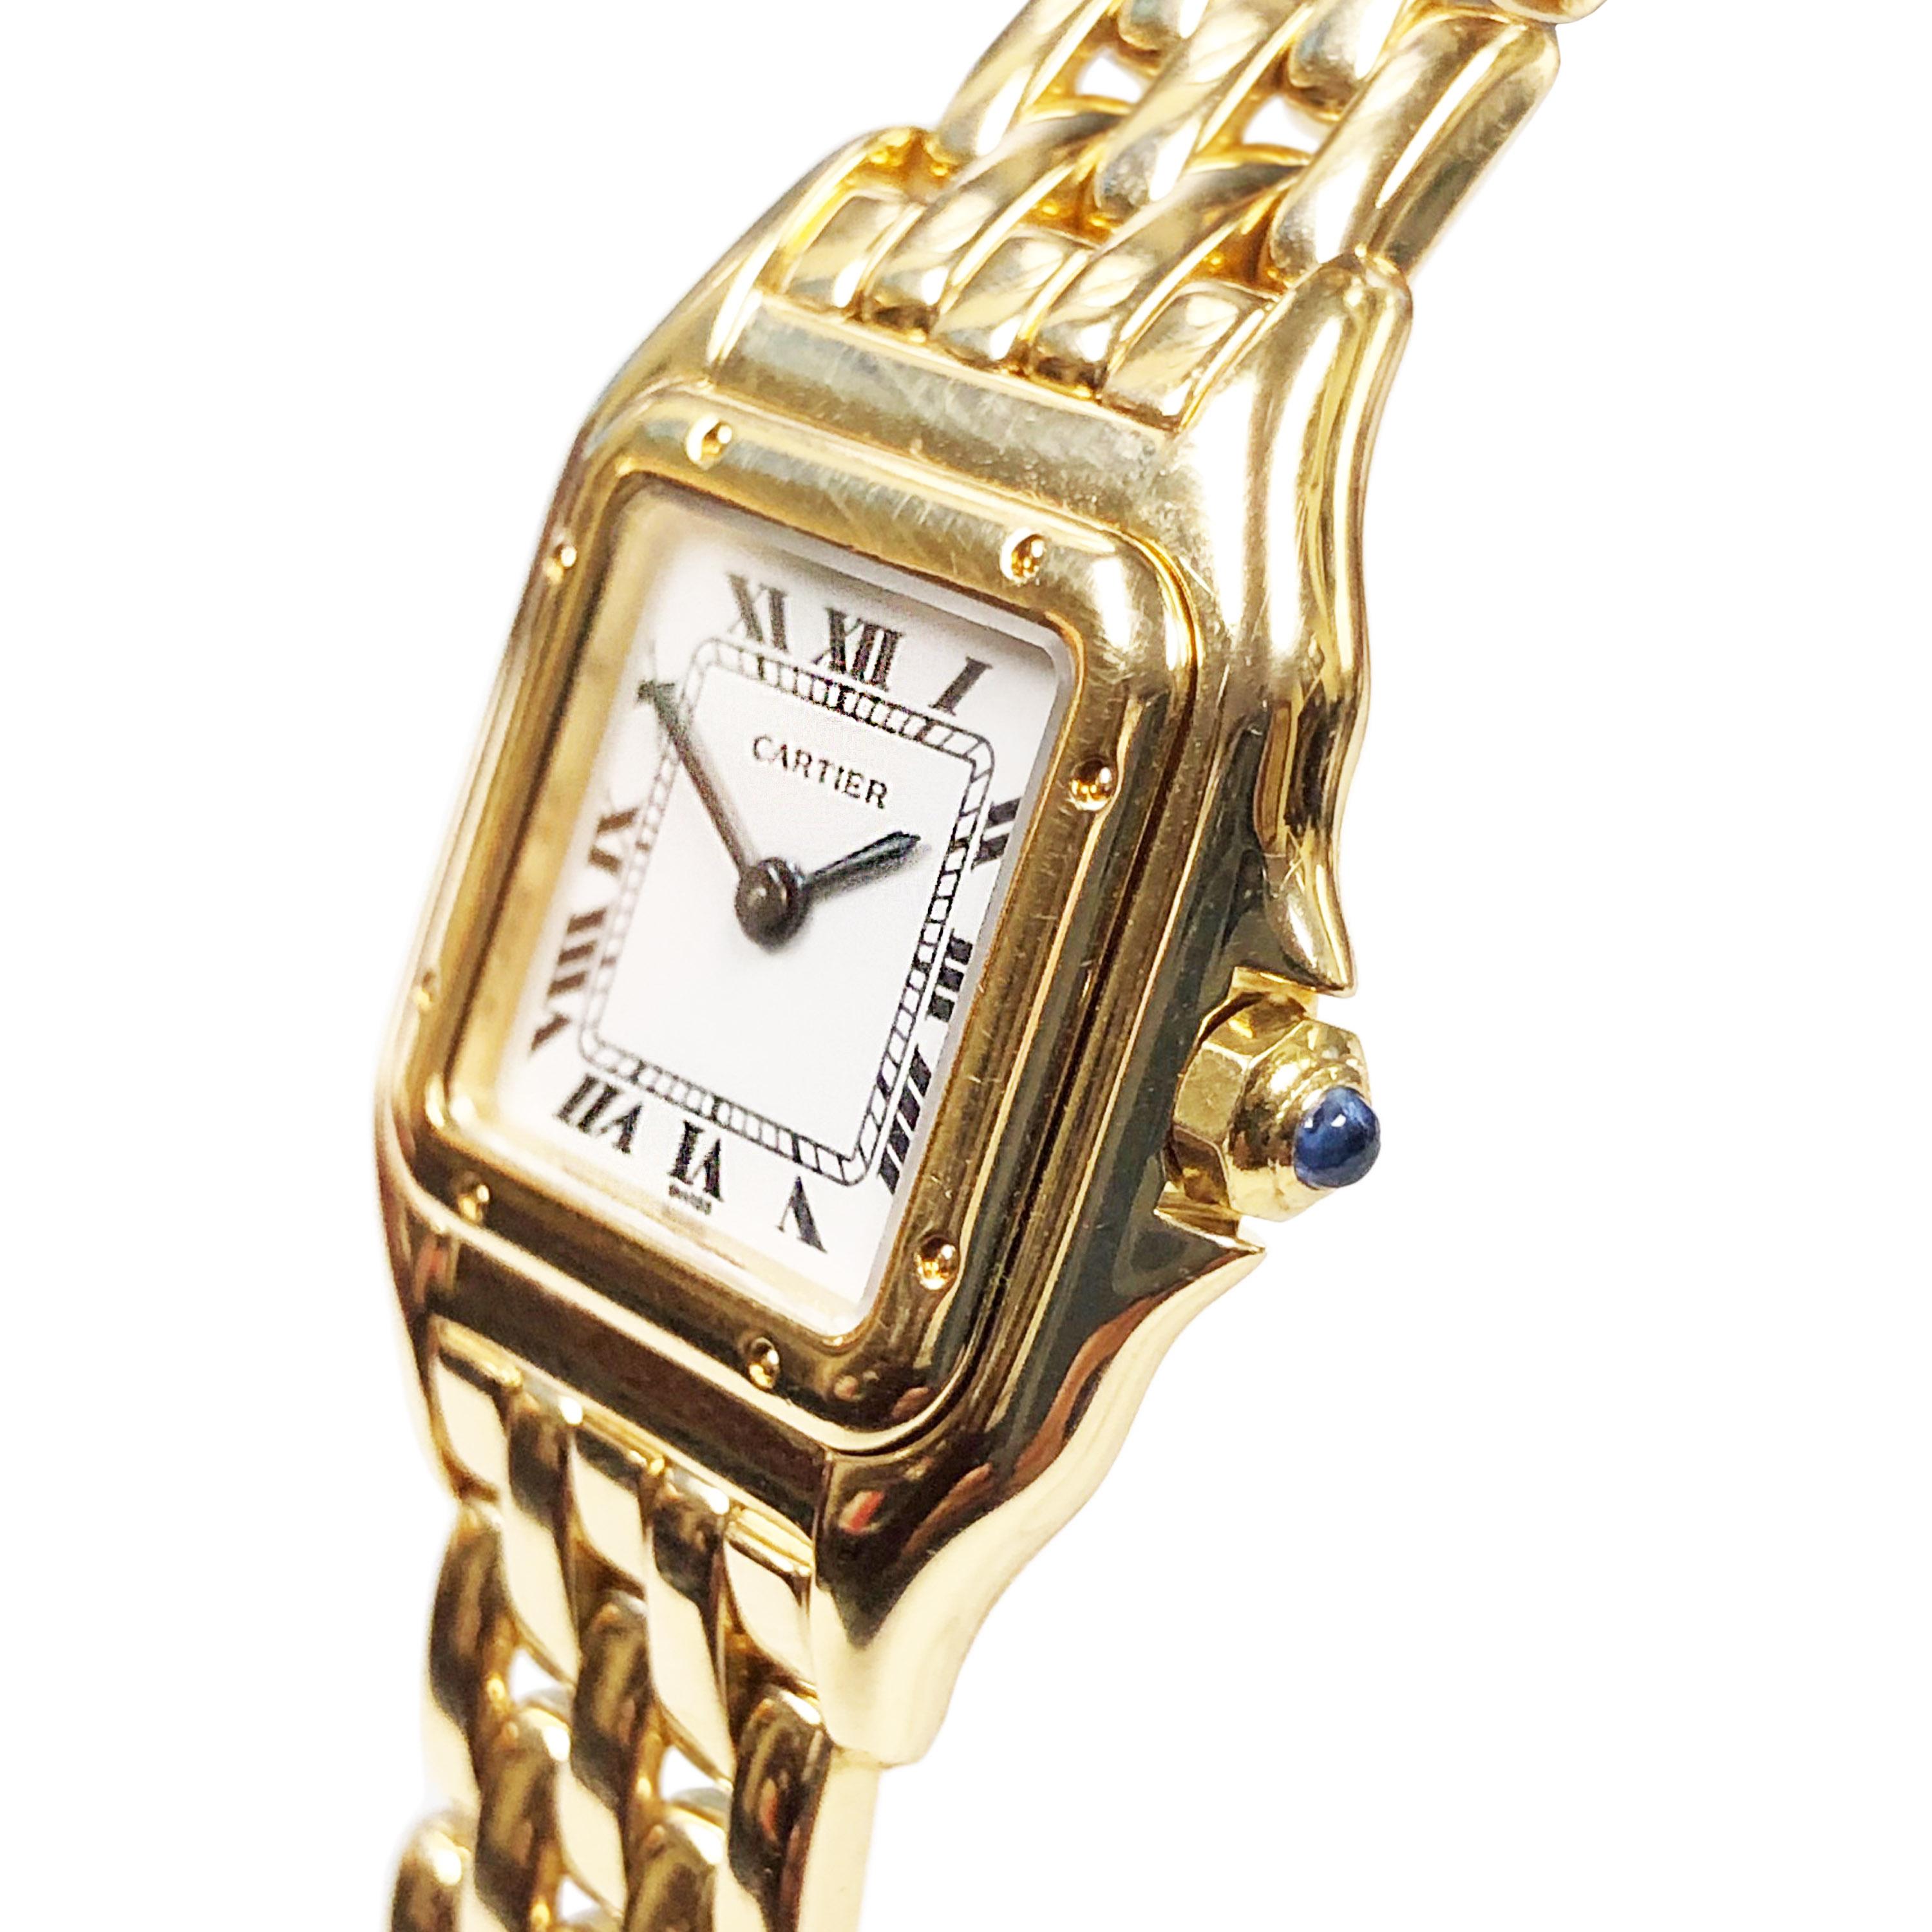 Circa 2000 Cartier 18K Yellow Gold Ladies Panther Wrist Watch. 29 X 22 MM water resistant case. Quartz Movement, White Dial with Black Roman numerals and a Sapphire Crown, 1/2 inch wide Panther Bracelet with Fold over Deployment Buckle. Measuring 6